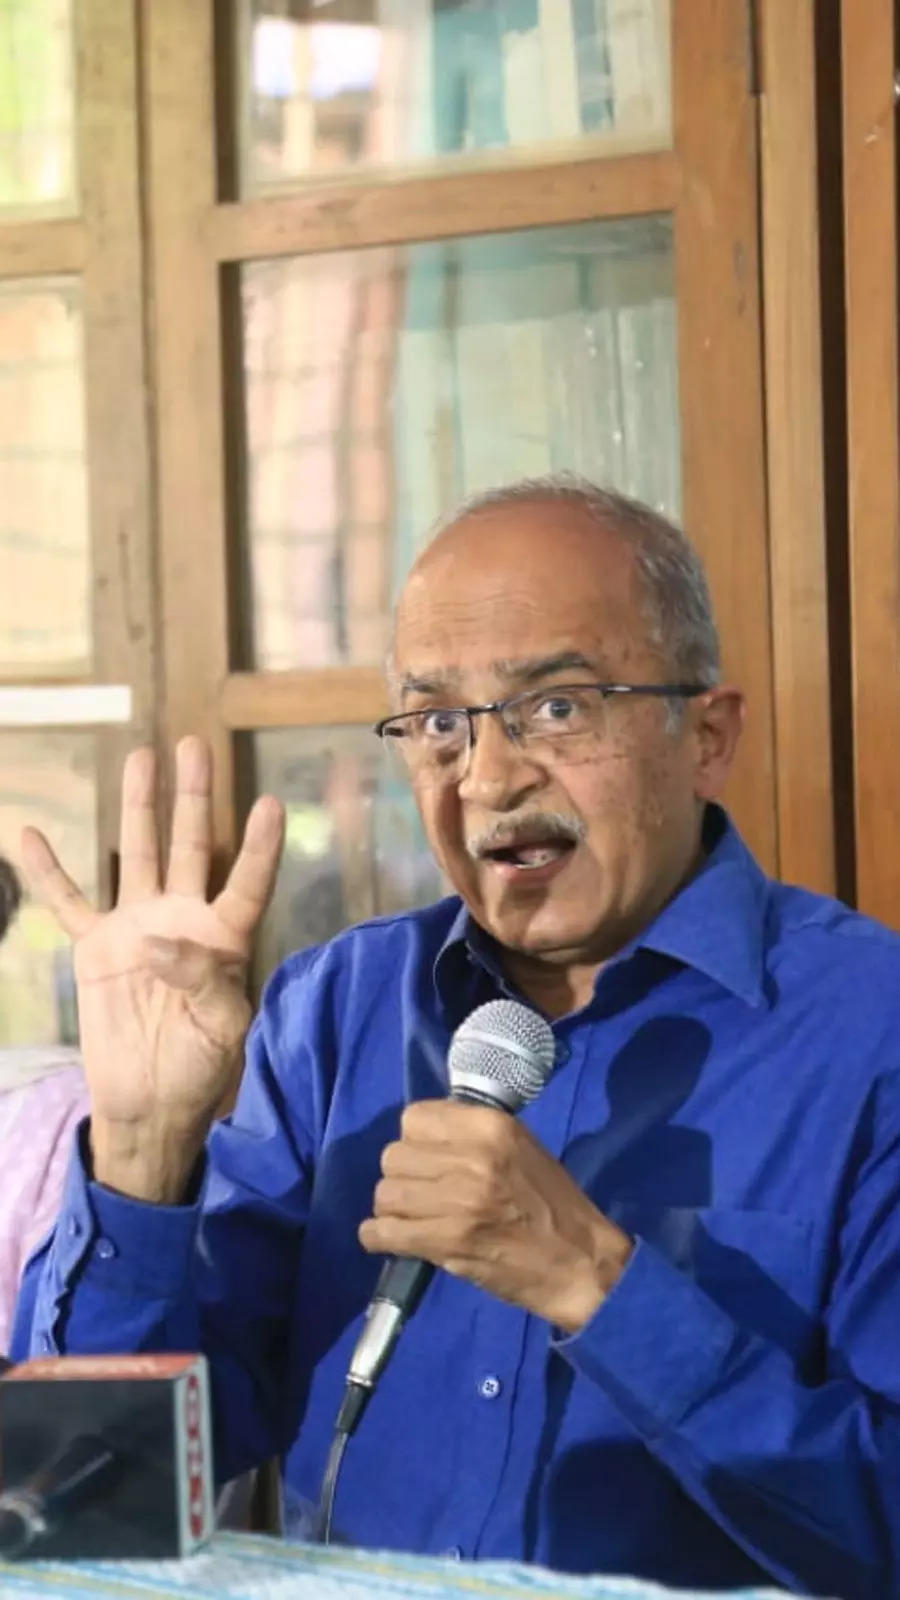 <p>After graduating from IIT Madras, Prashant Bhushan pursued law and graduated from the Faculty of Law, University of Delhi. He was called to the bar in 1979.</p>